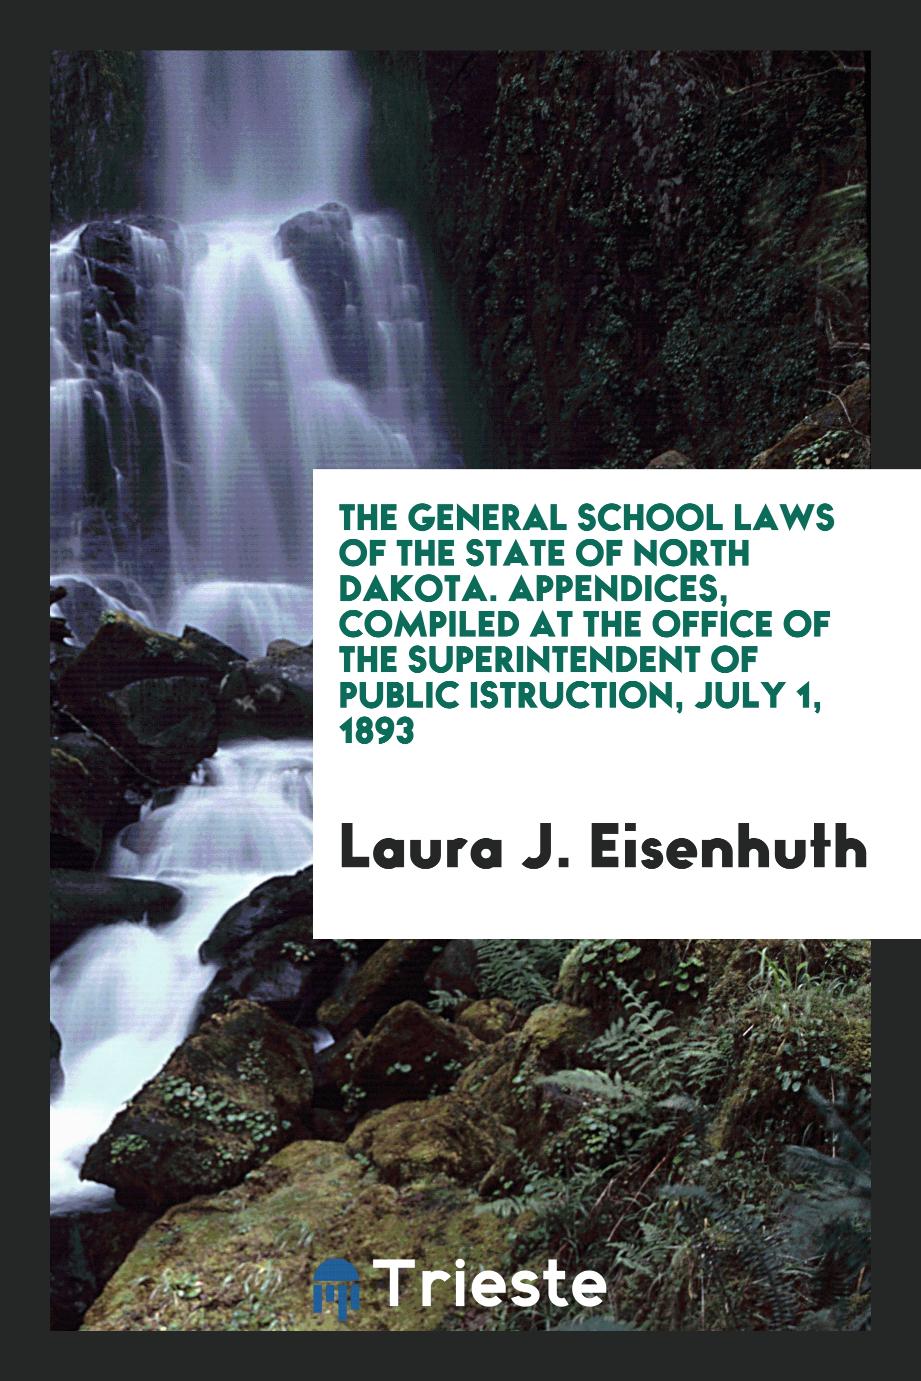 The General School Laws of the State of North Dakota. Appendices, Compiled at the Office of the Superintendent of Public Istruction, July 1, 1893